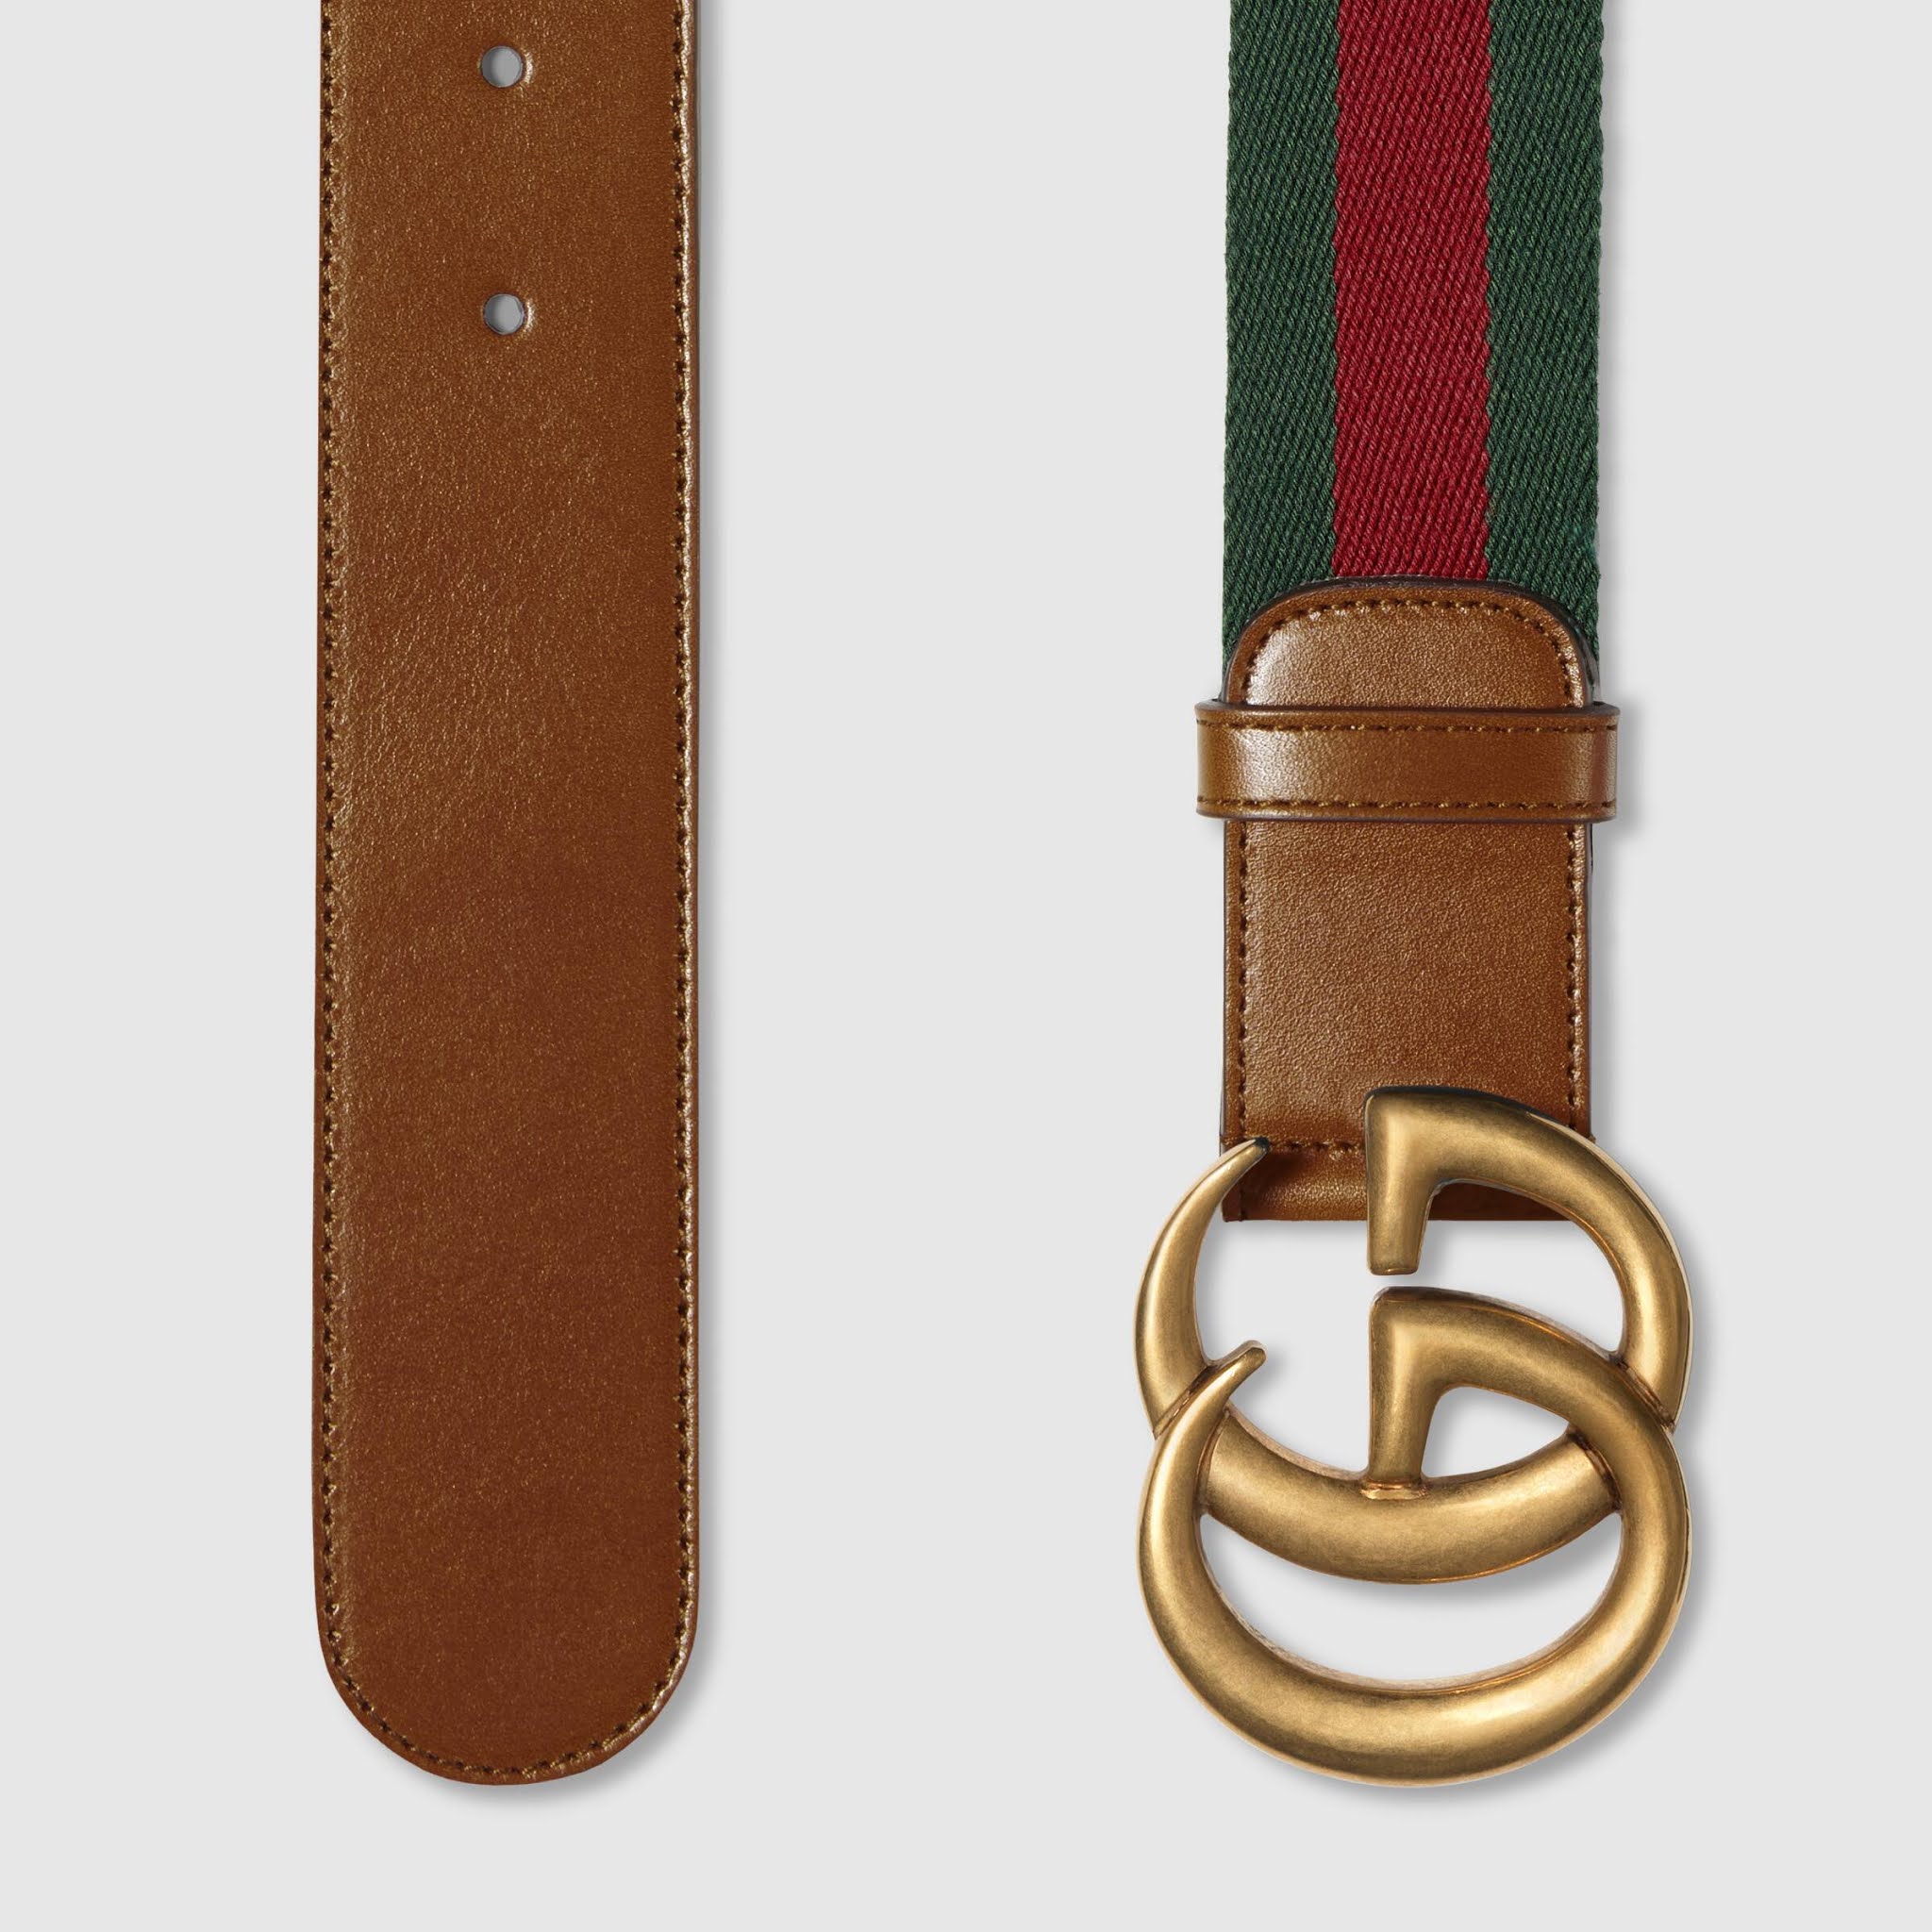 How To Measure Belt Size Gucci : Mens Gucci Belt Sizing Off 72 Www ...